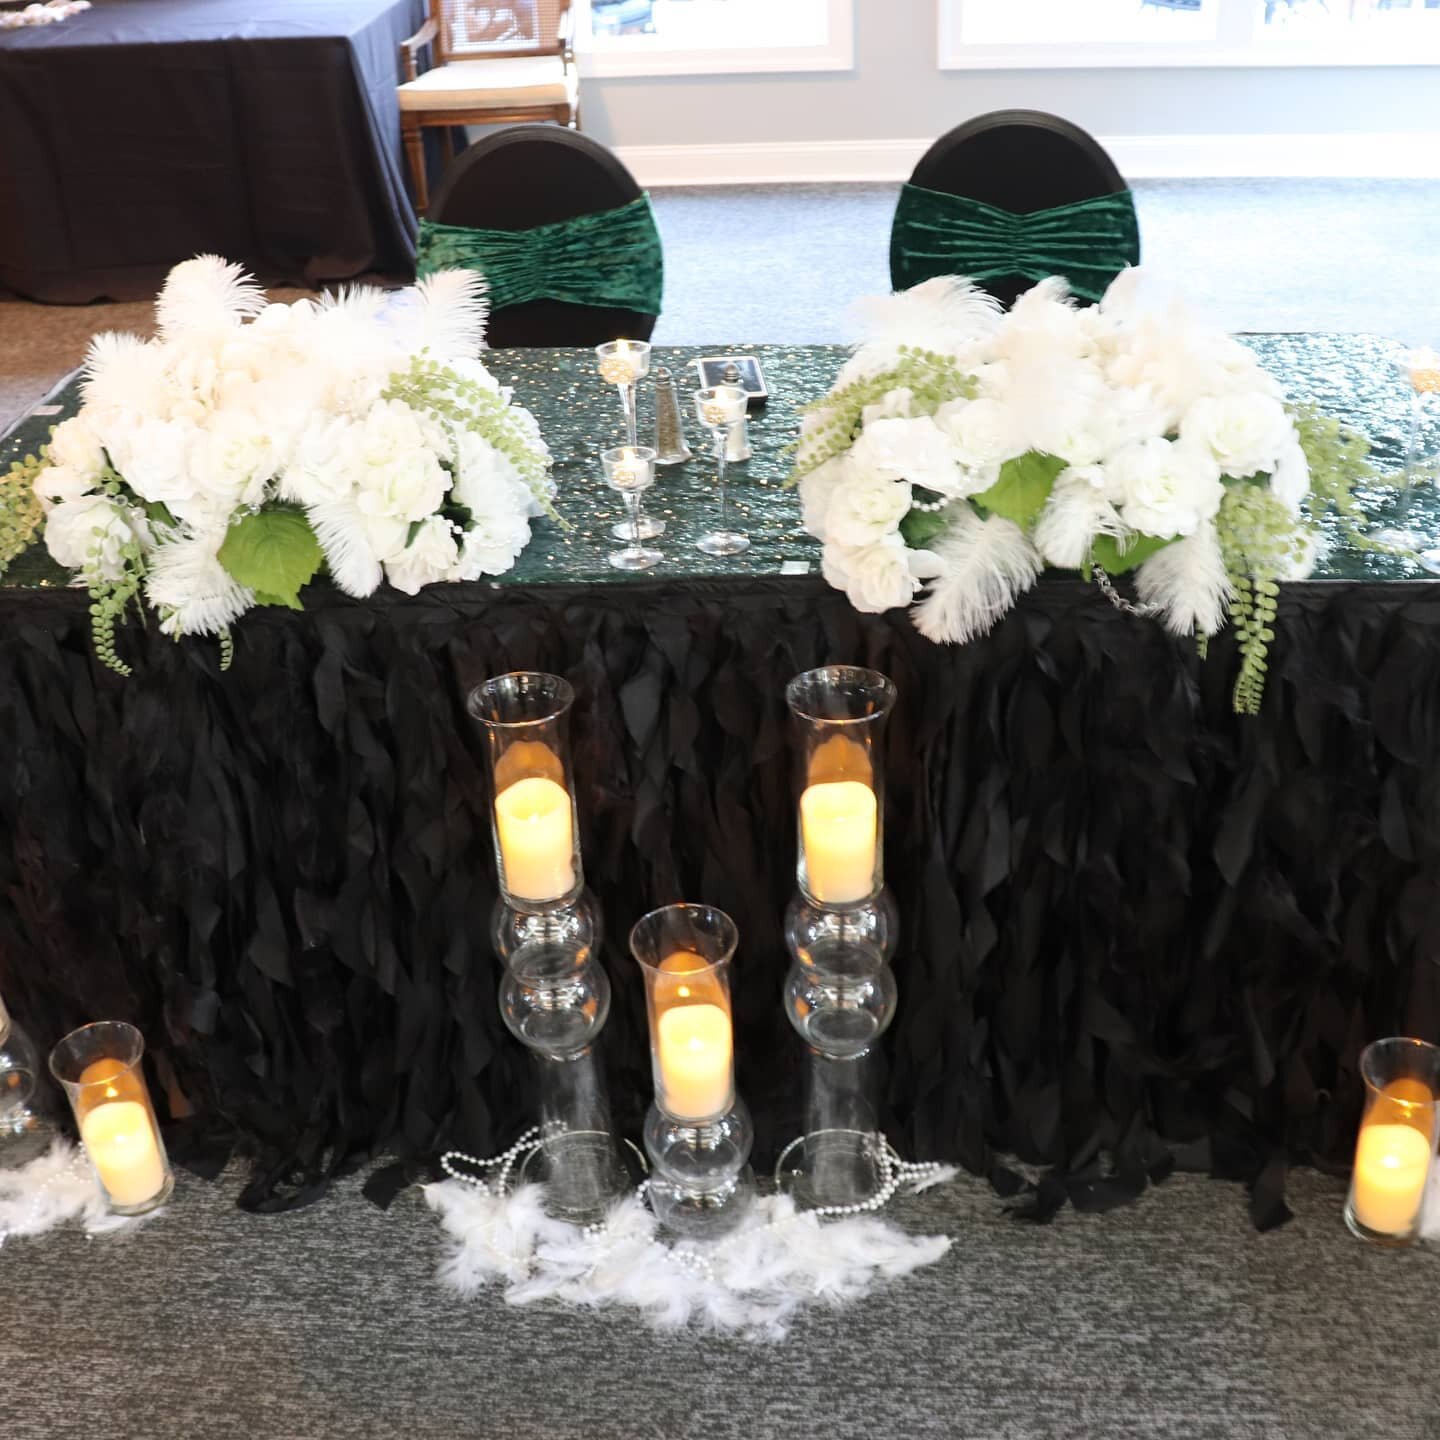 A Headtable fit for a fortieth Birthday Queen. 40 is the New Roaring 20s!